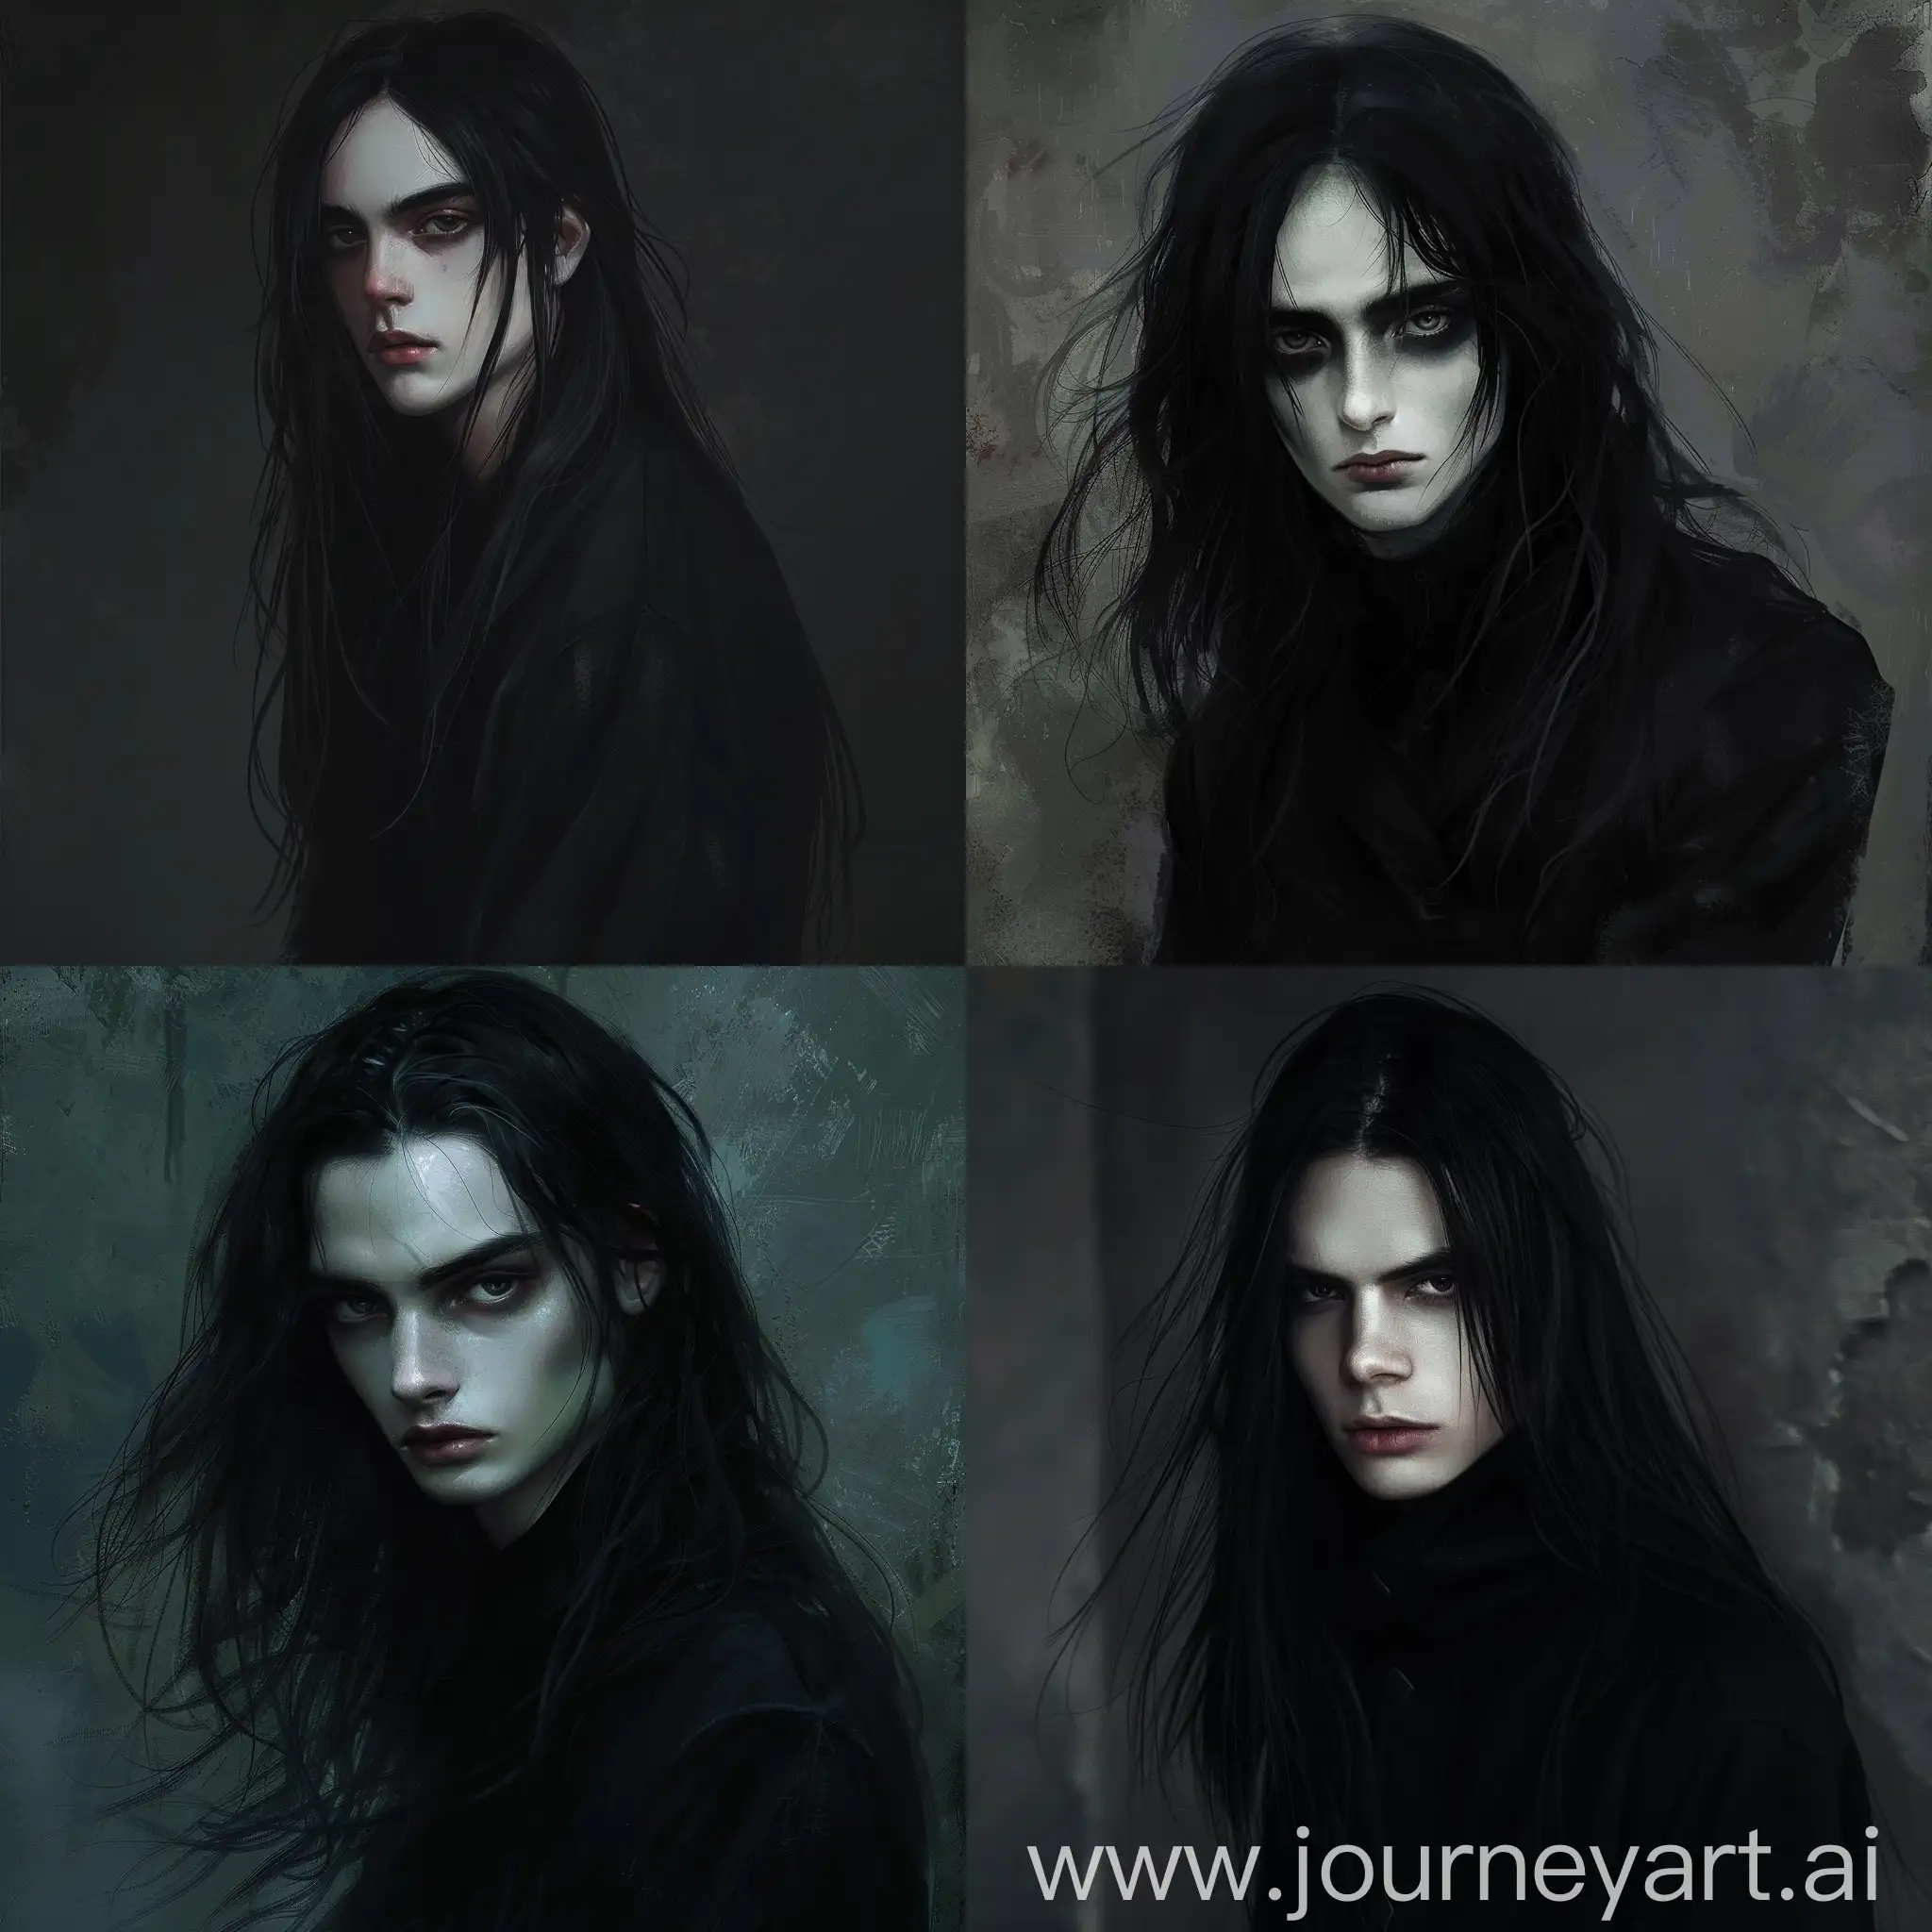 Mysterious-Portrait-of-a-Handsome-Boy-with-Long-Black-Hair